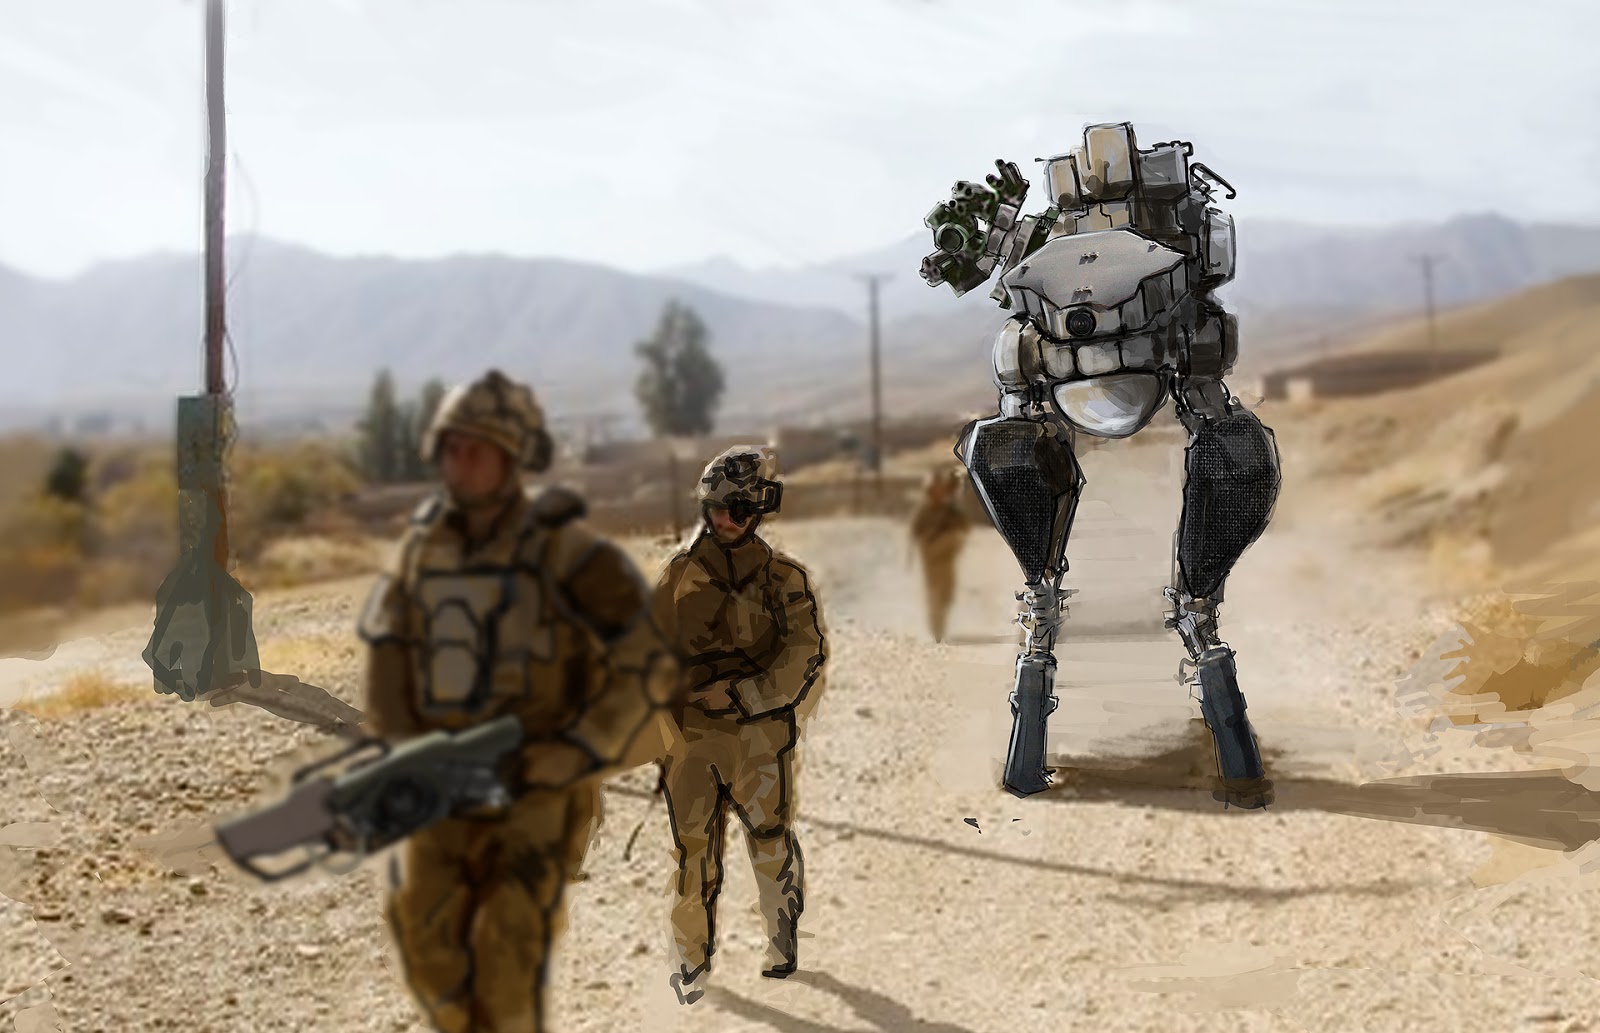 Robots in military